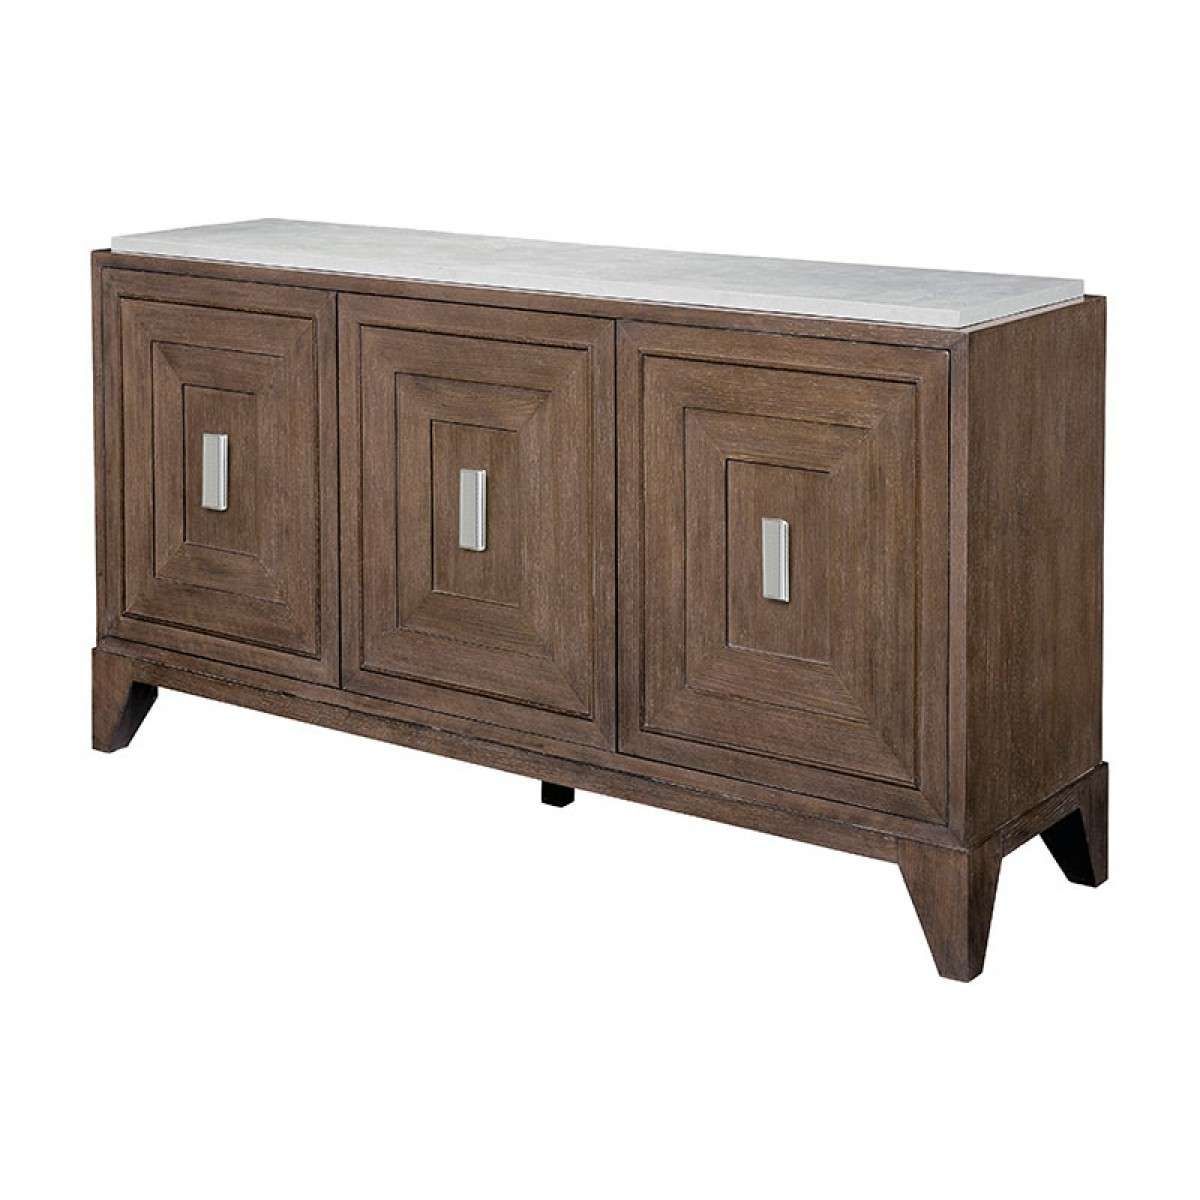 Anthony Baratta Crawford Sideboard With Thomasville Sideboards (View 5 of 20)